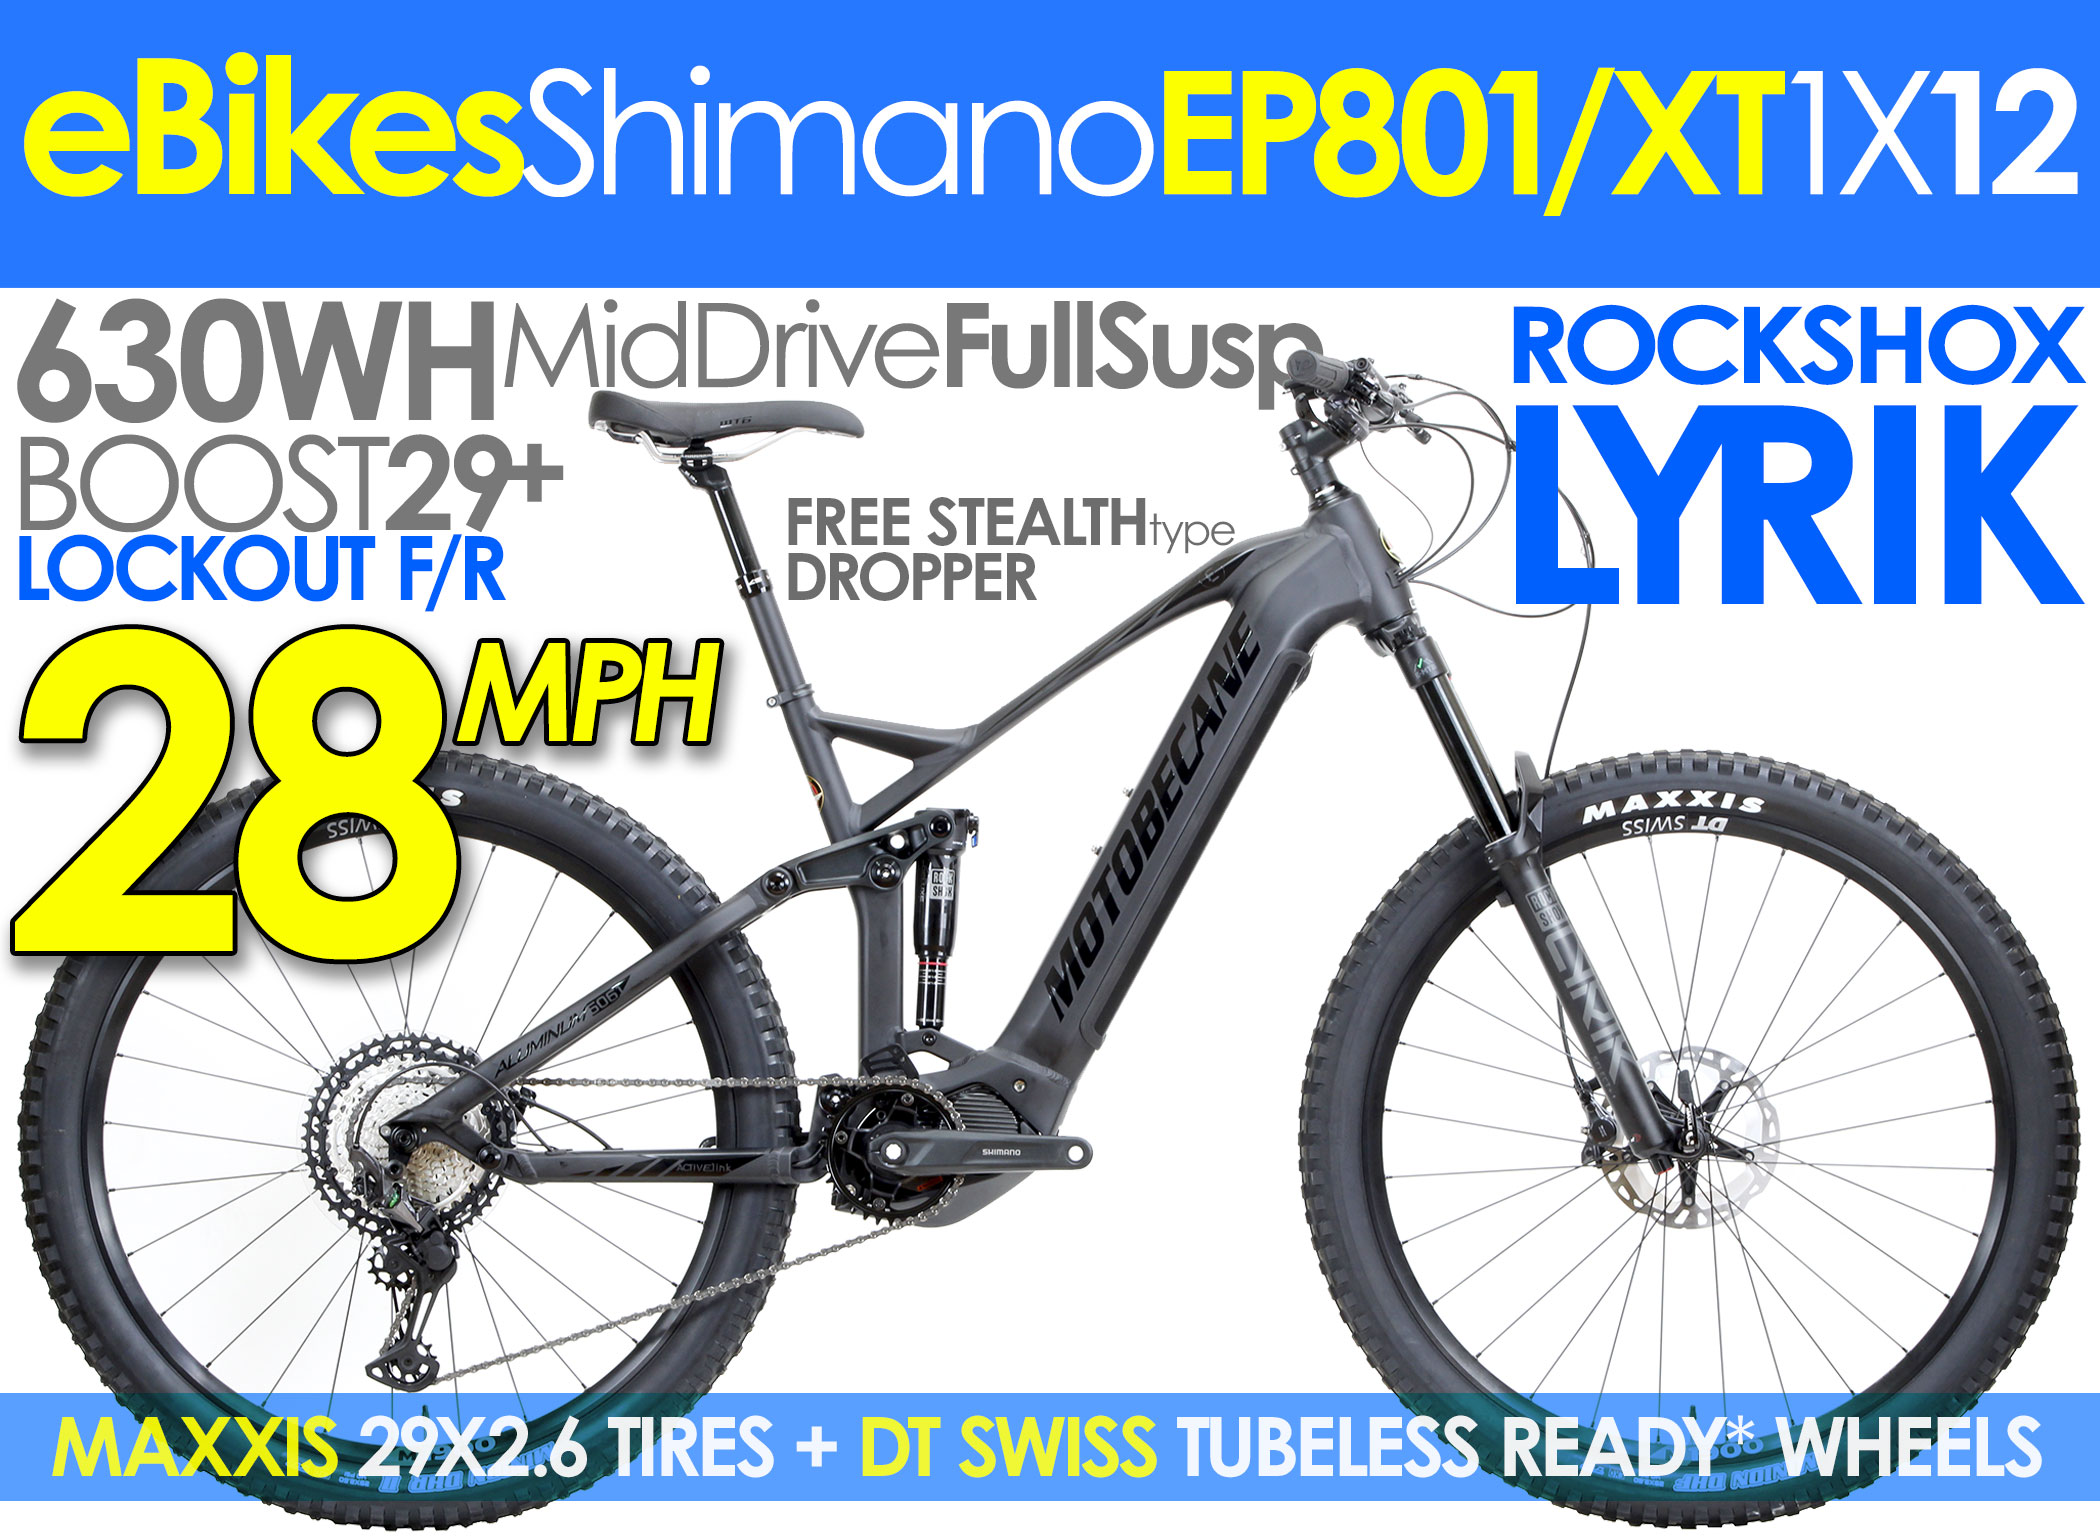 More range: New 630 Wh Shimano battery and new display for all Shimano-STEPS  motors